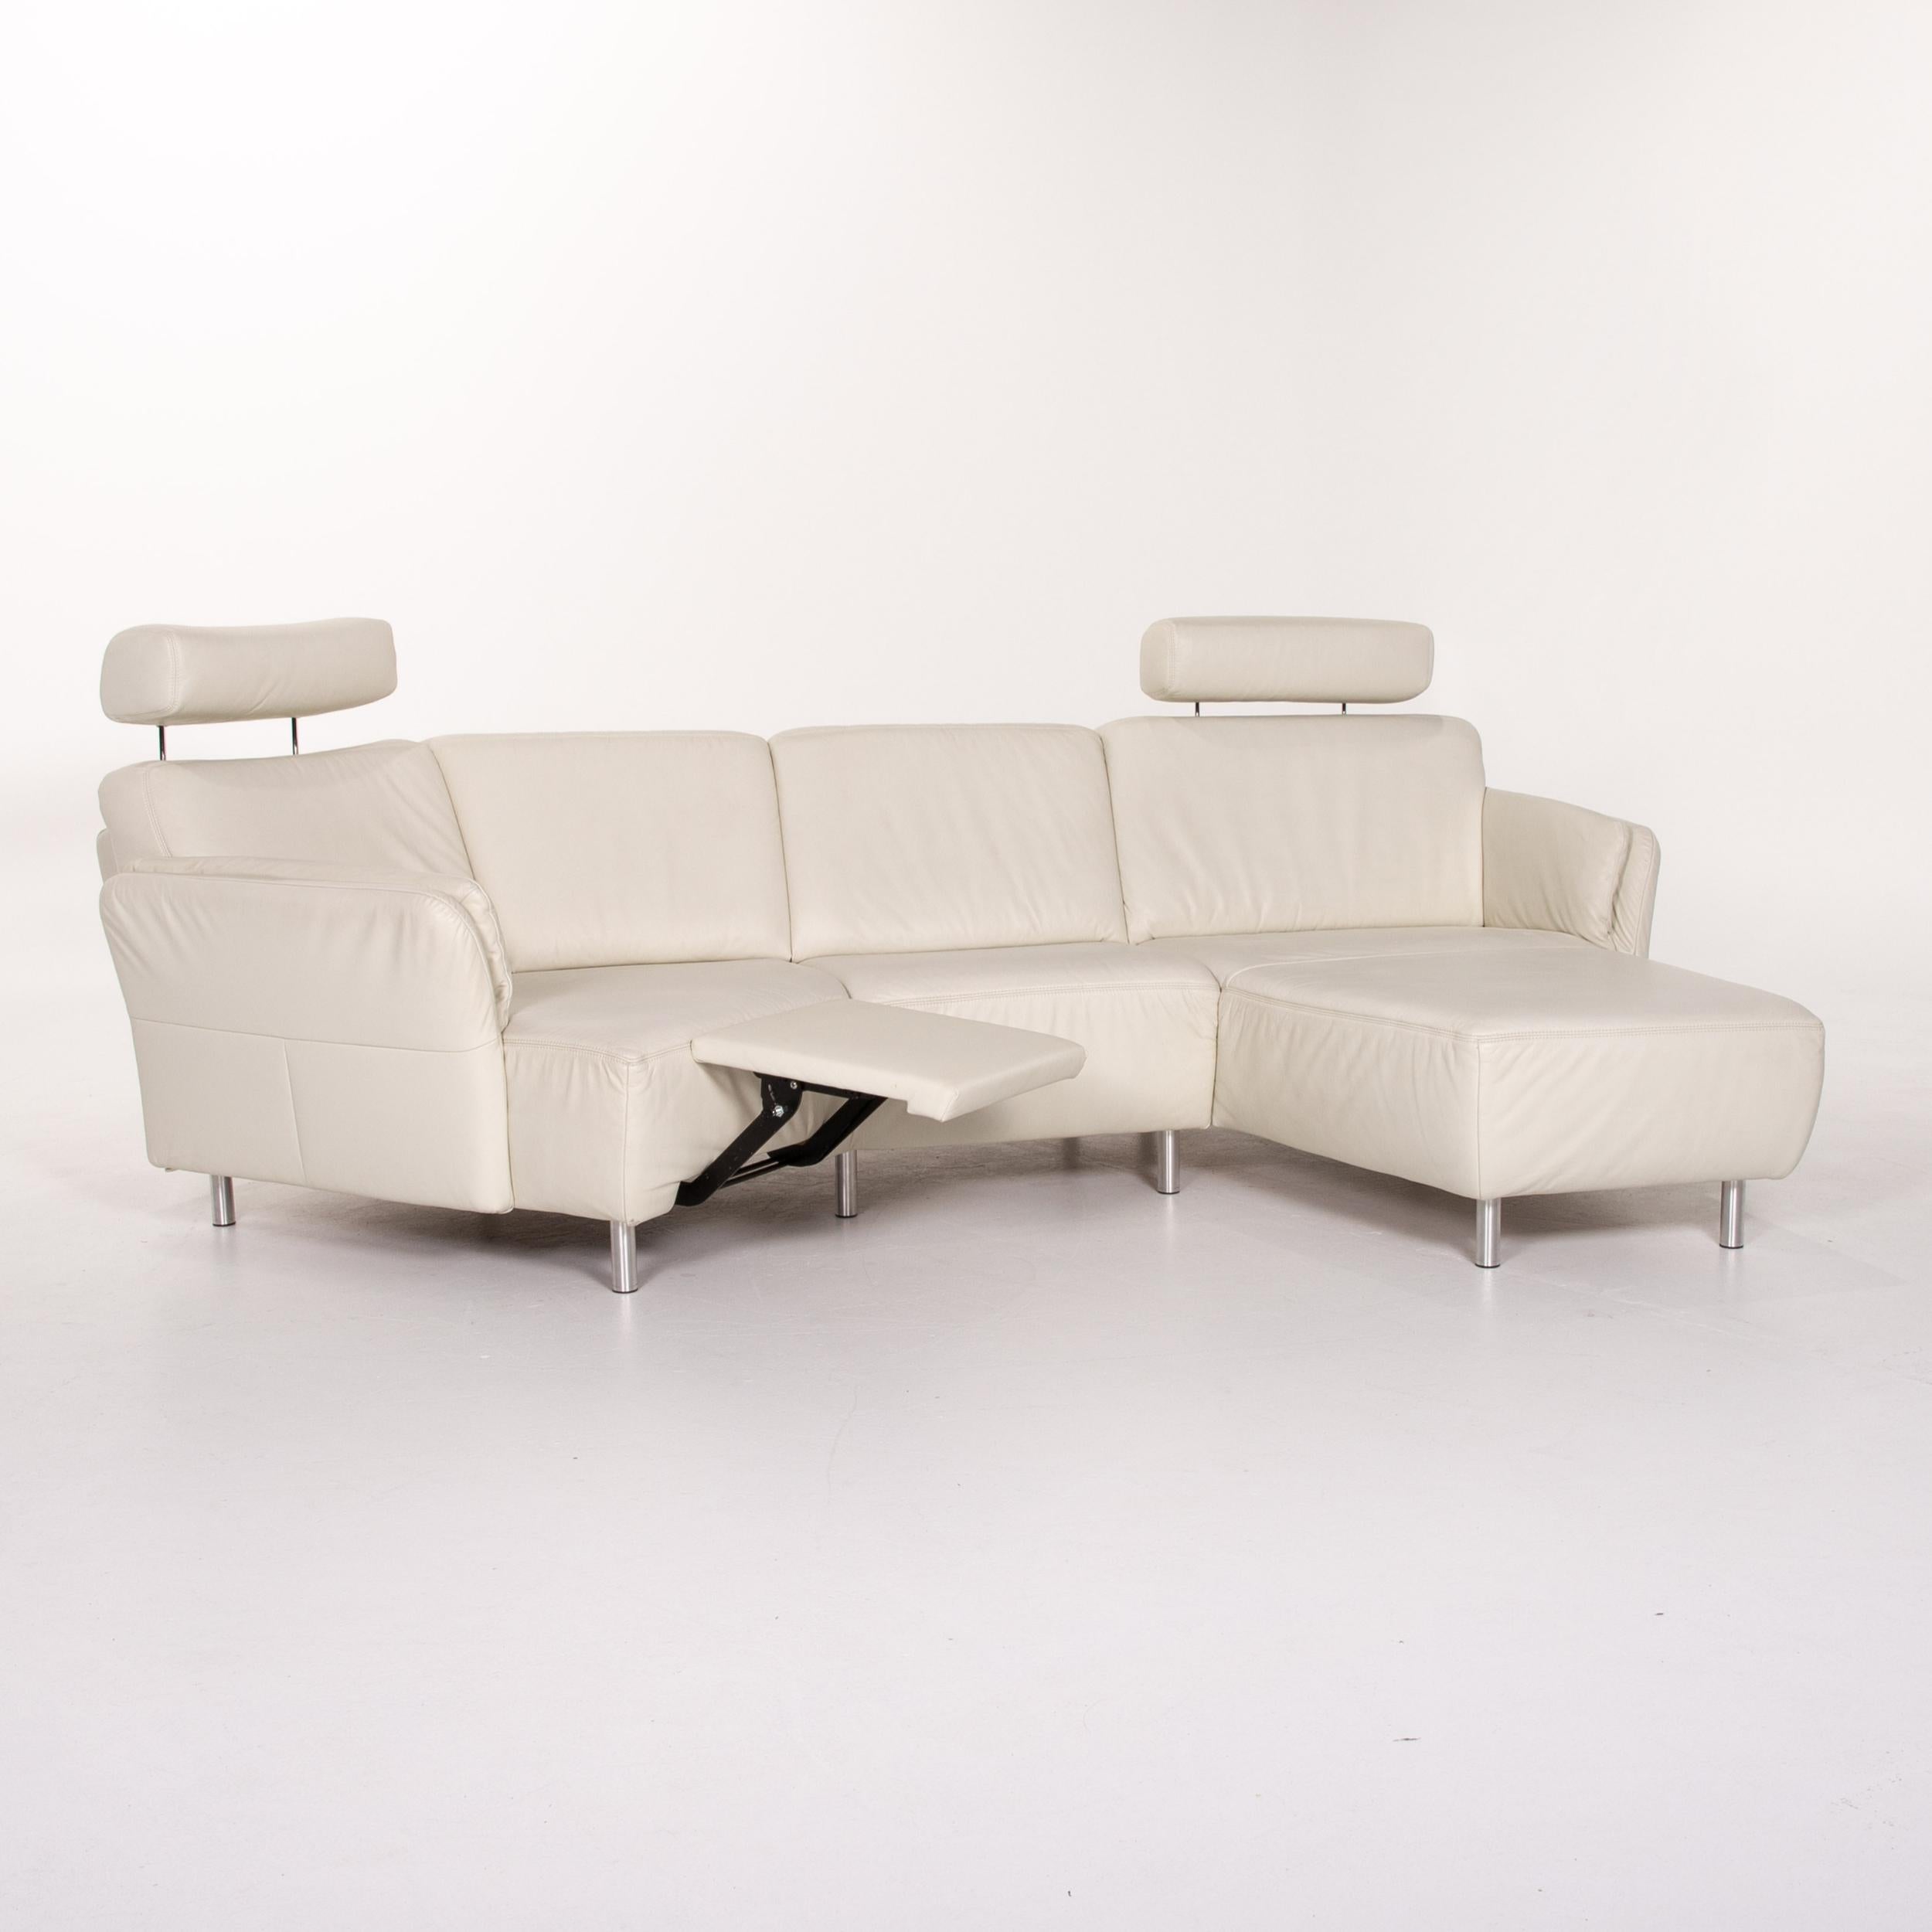 Modern Sample Ring Leather Corner Sofa Cream Sofa Couch For Sale